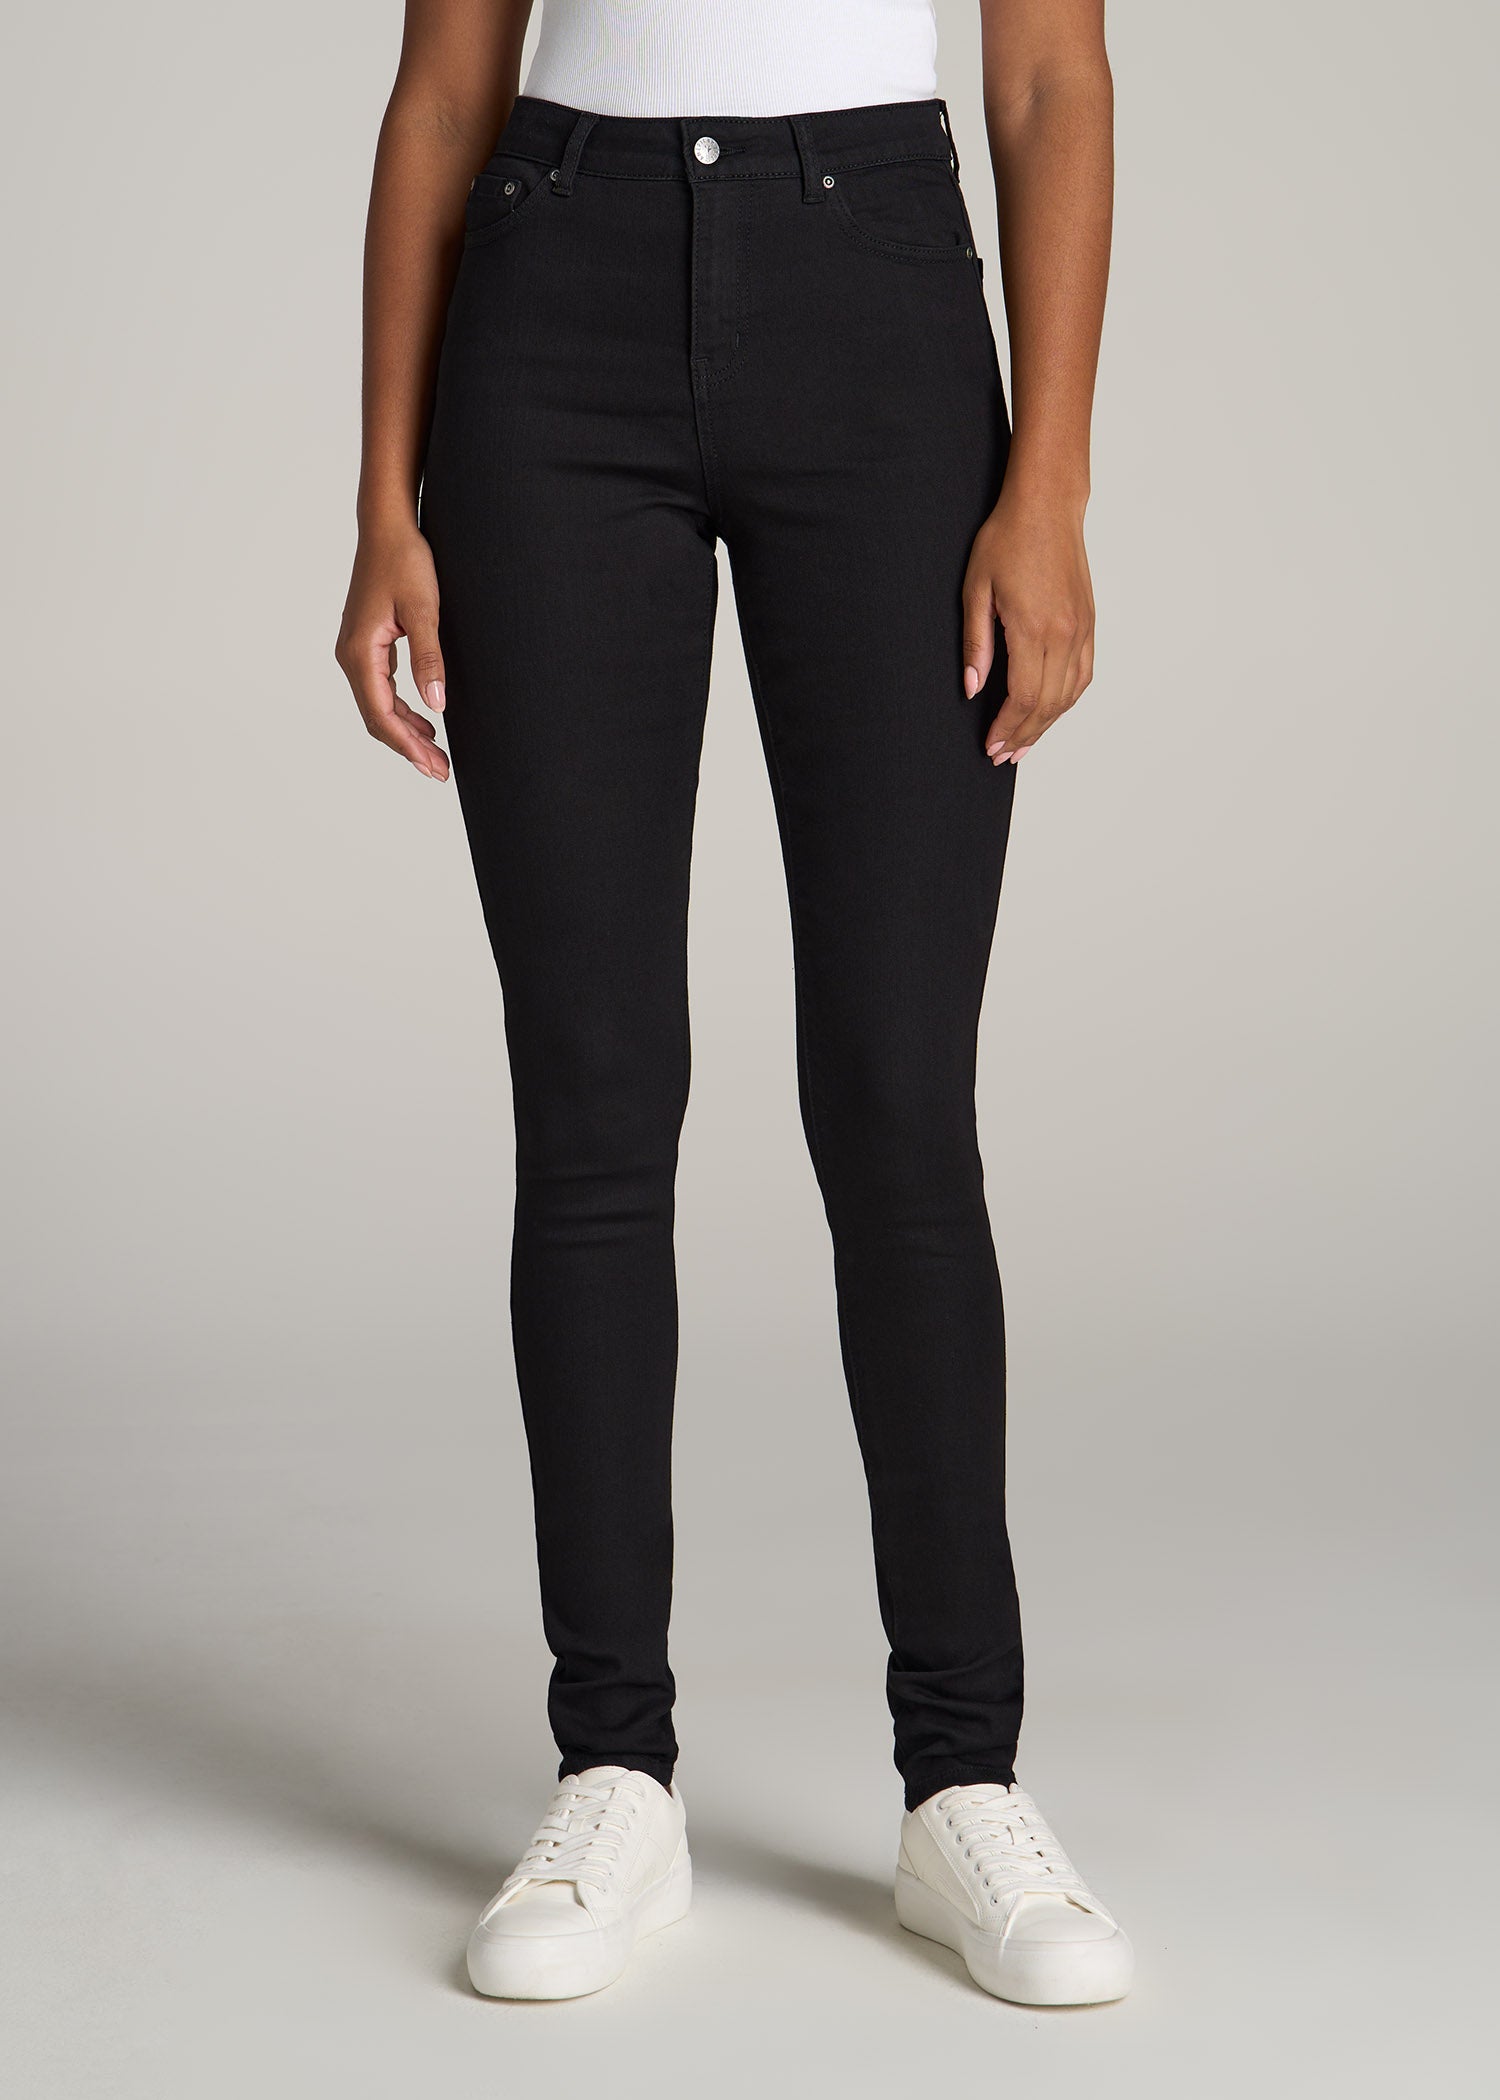 Women's Classic Faded Out Skinny Jeggings. • Faux front button